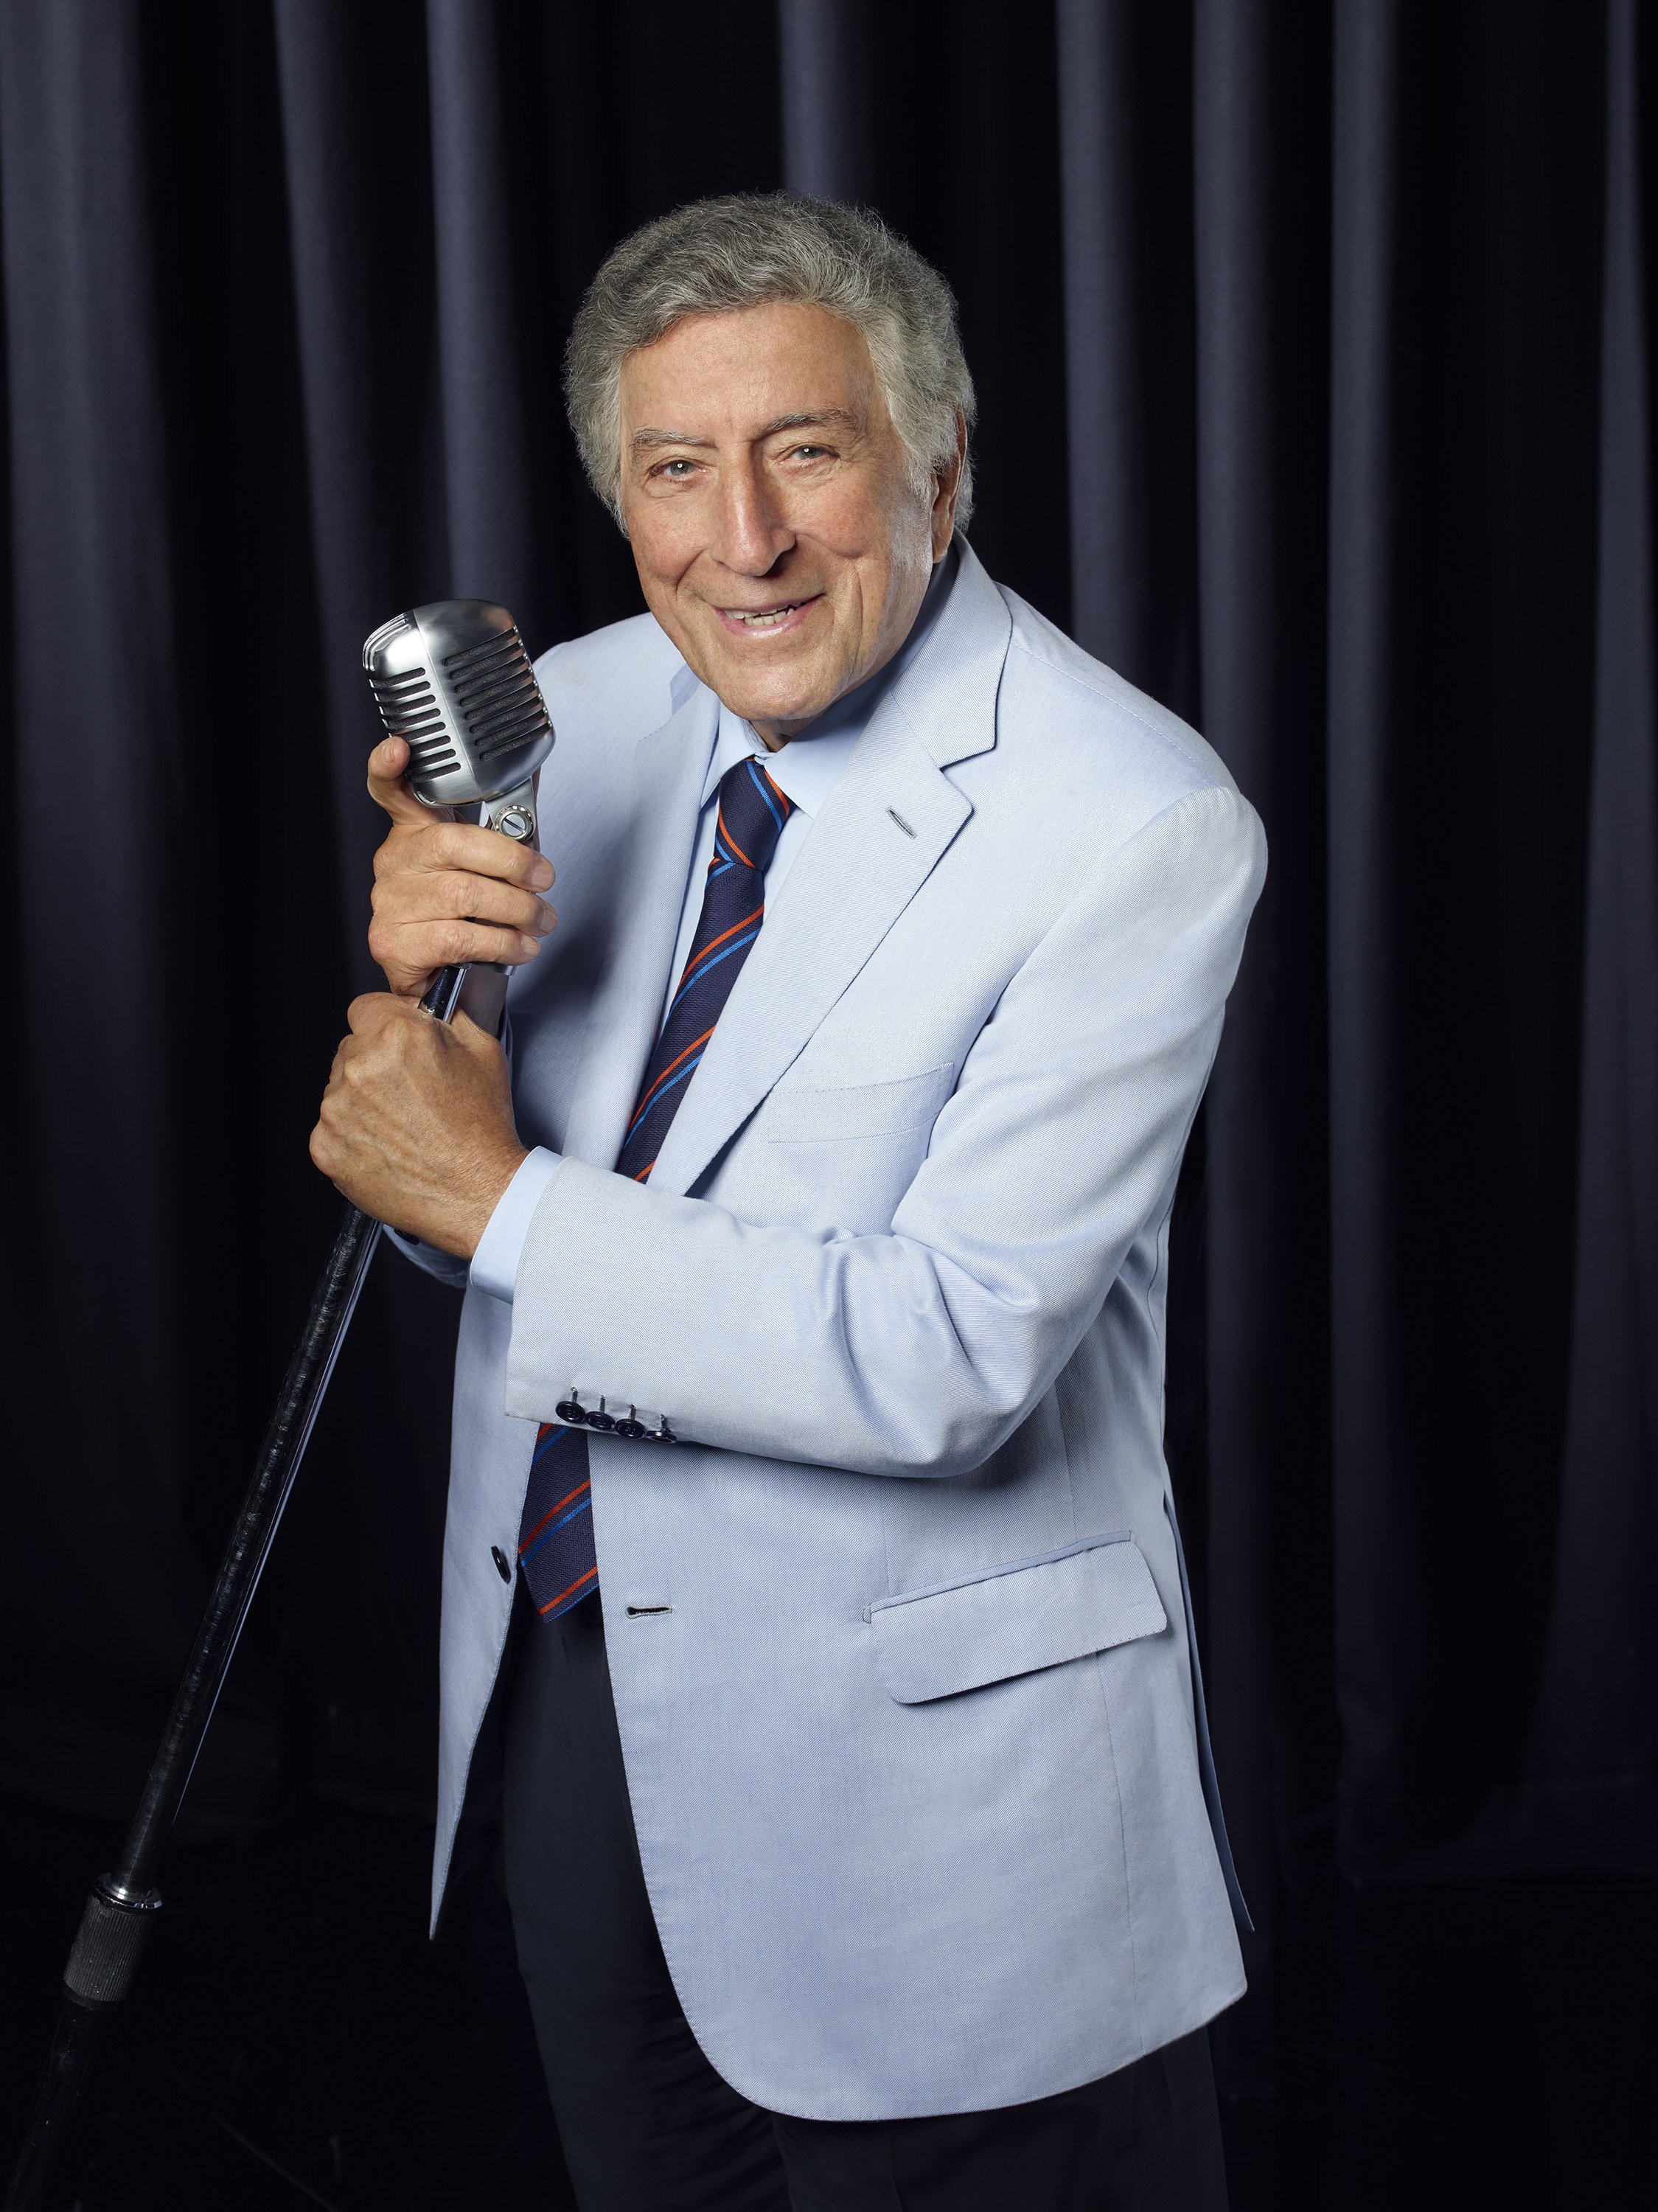 Tony Bennett pictured inside a studio on September 13, 2016. | Source: Getty Images